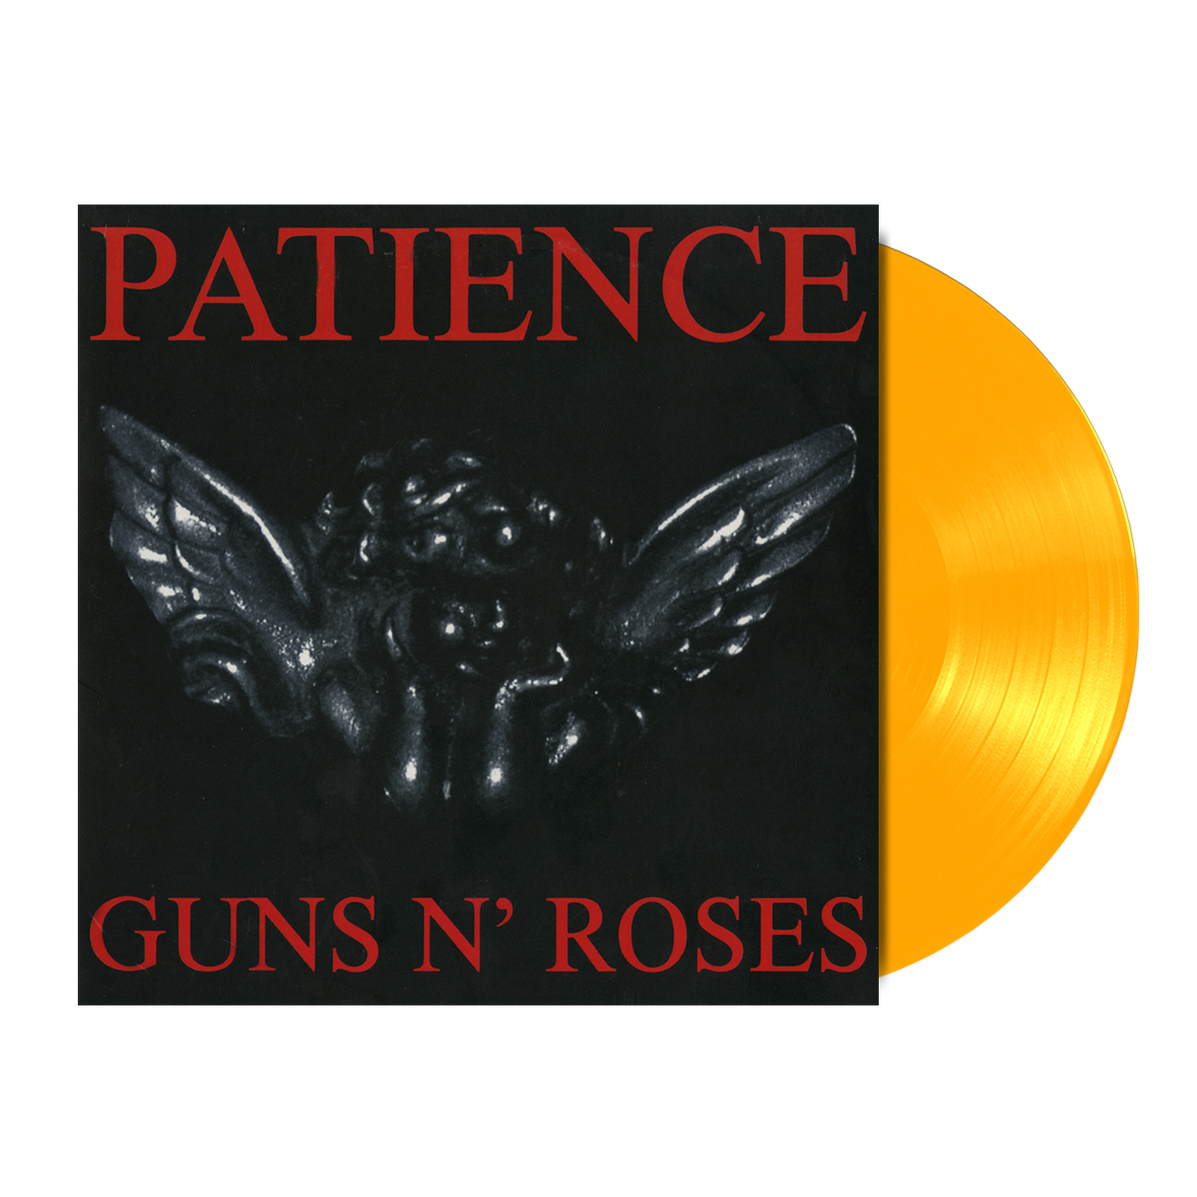 Buy Guns N Roses Patience Vinyl Records For Sale The Sound Of Vinyl